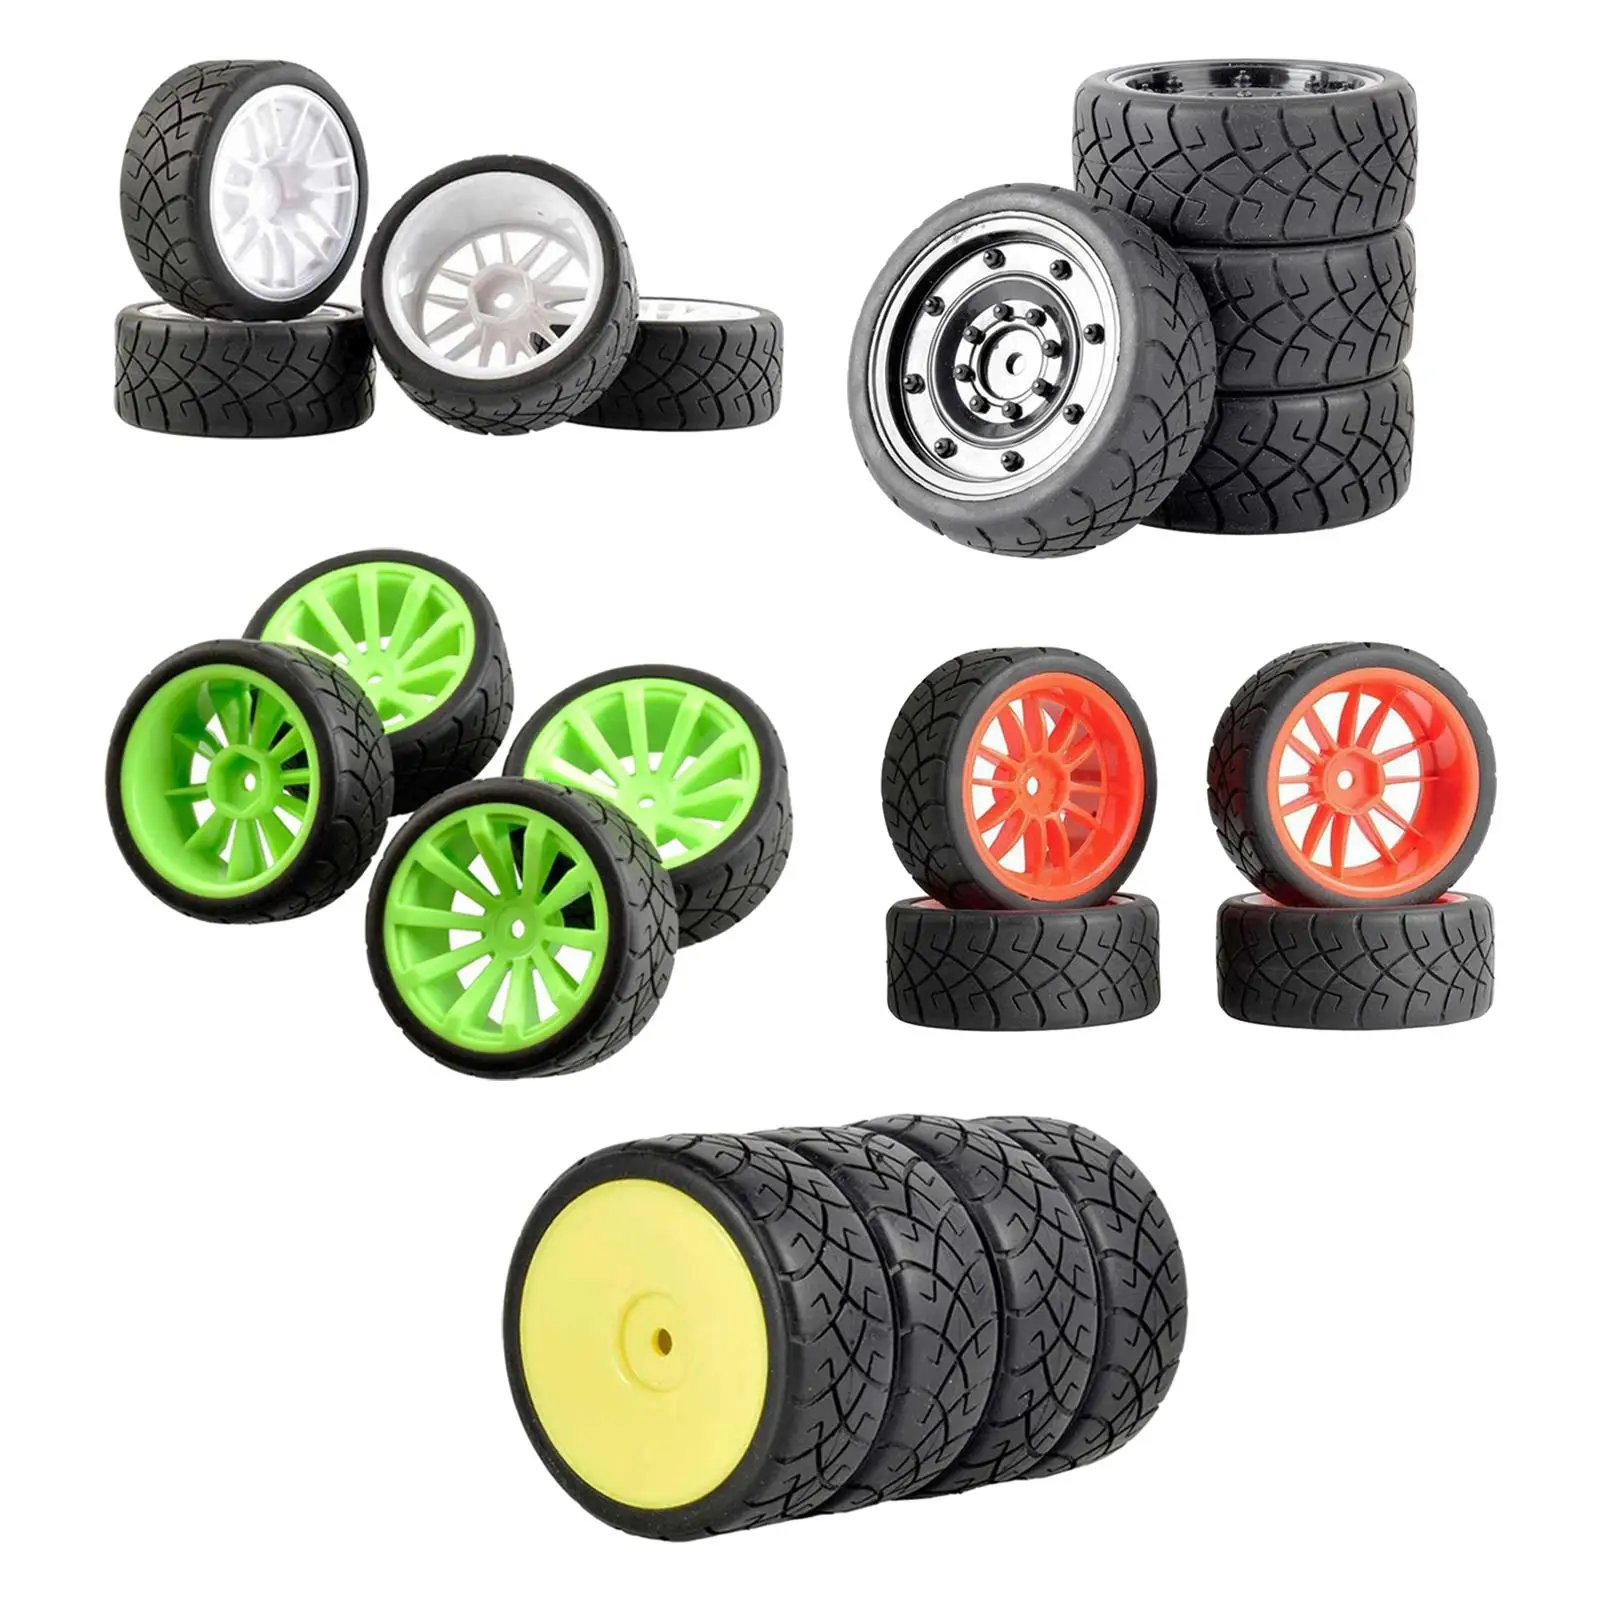 1/10 Rubber Tire RC Racing Car Wheel 12mm Adapter for WLtoys 144001 124018 124019 RC Model Car